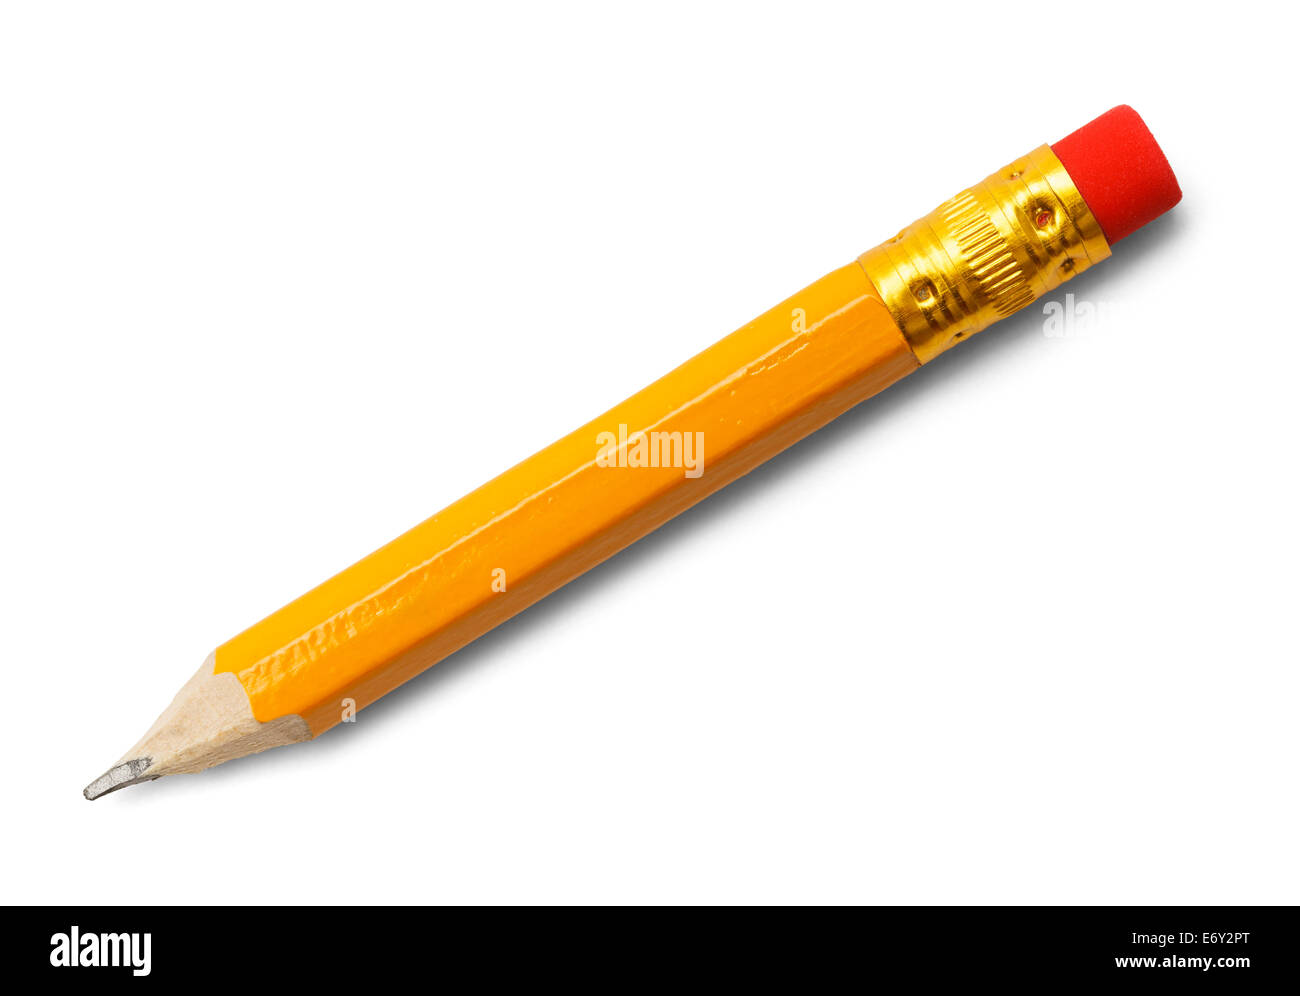 Short Yellow Number 2 Pencil with Red Eraser Isolated on White Background. Stock Photo